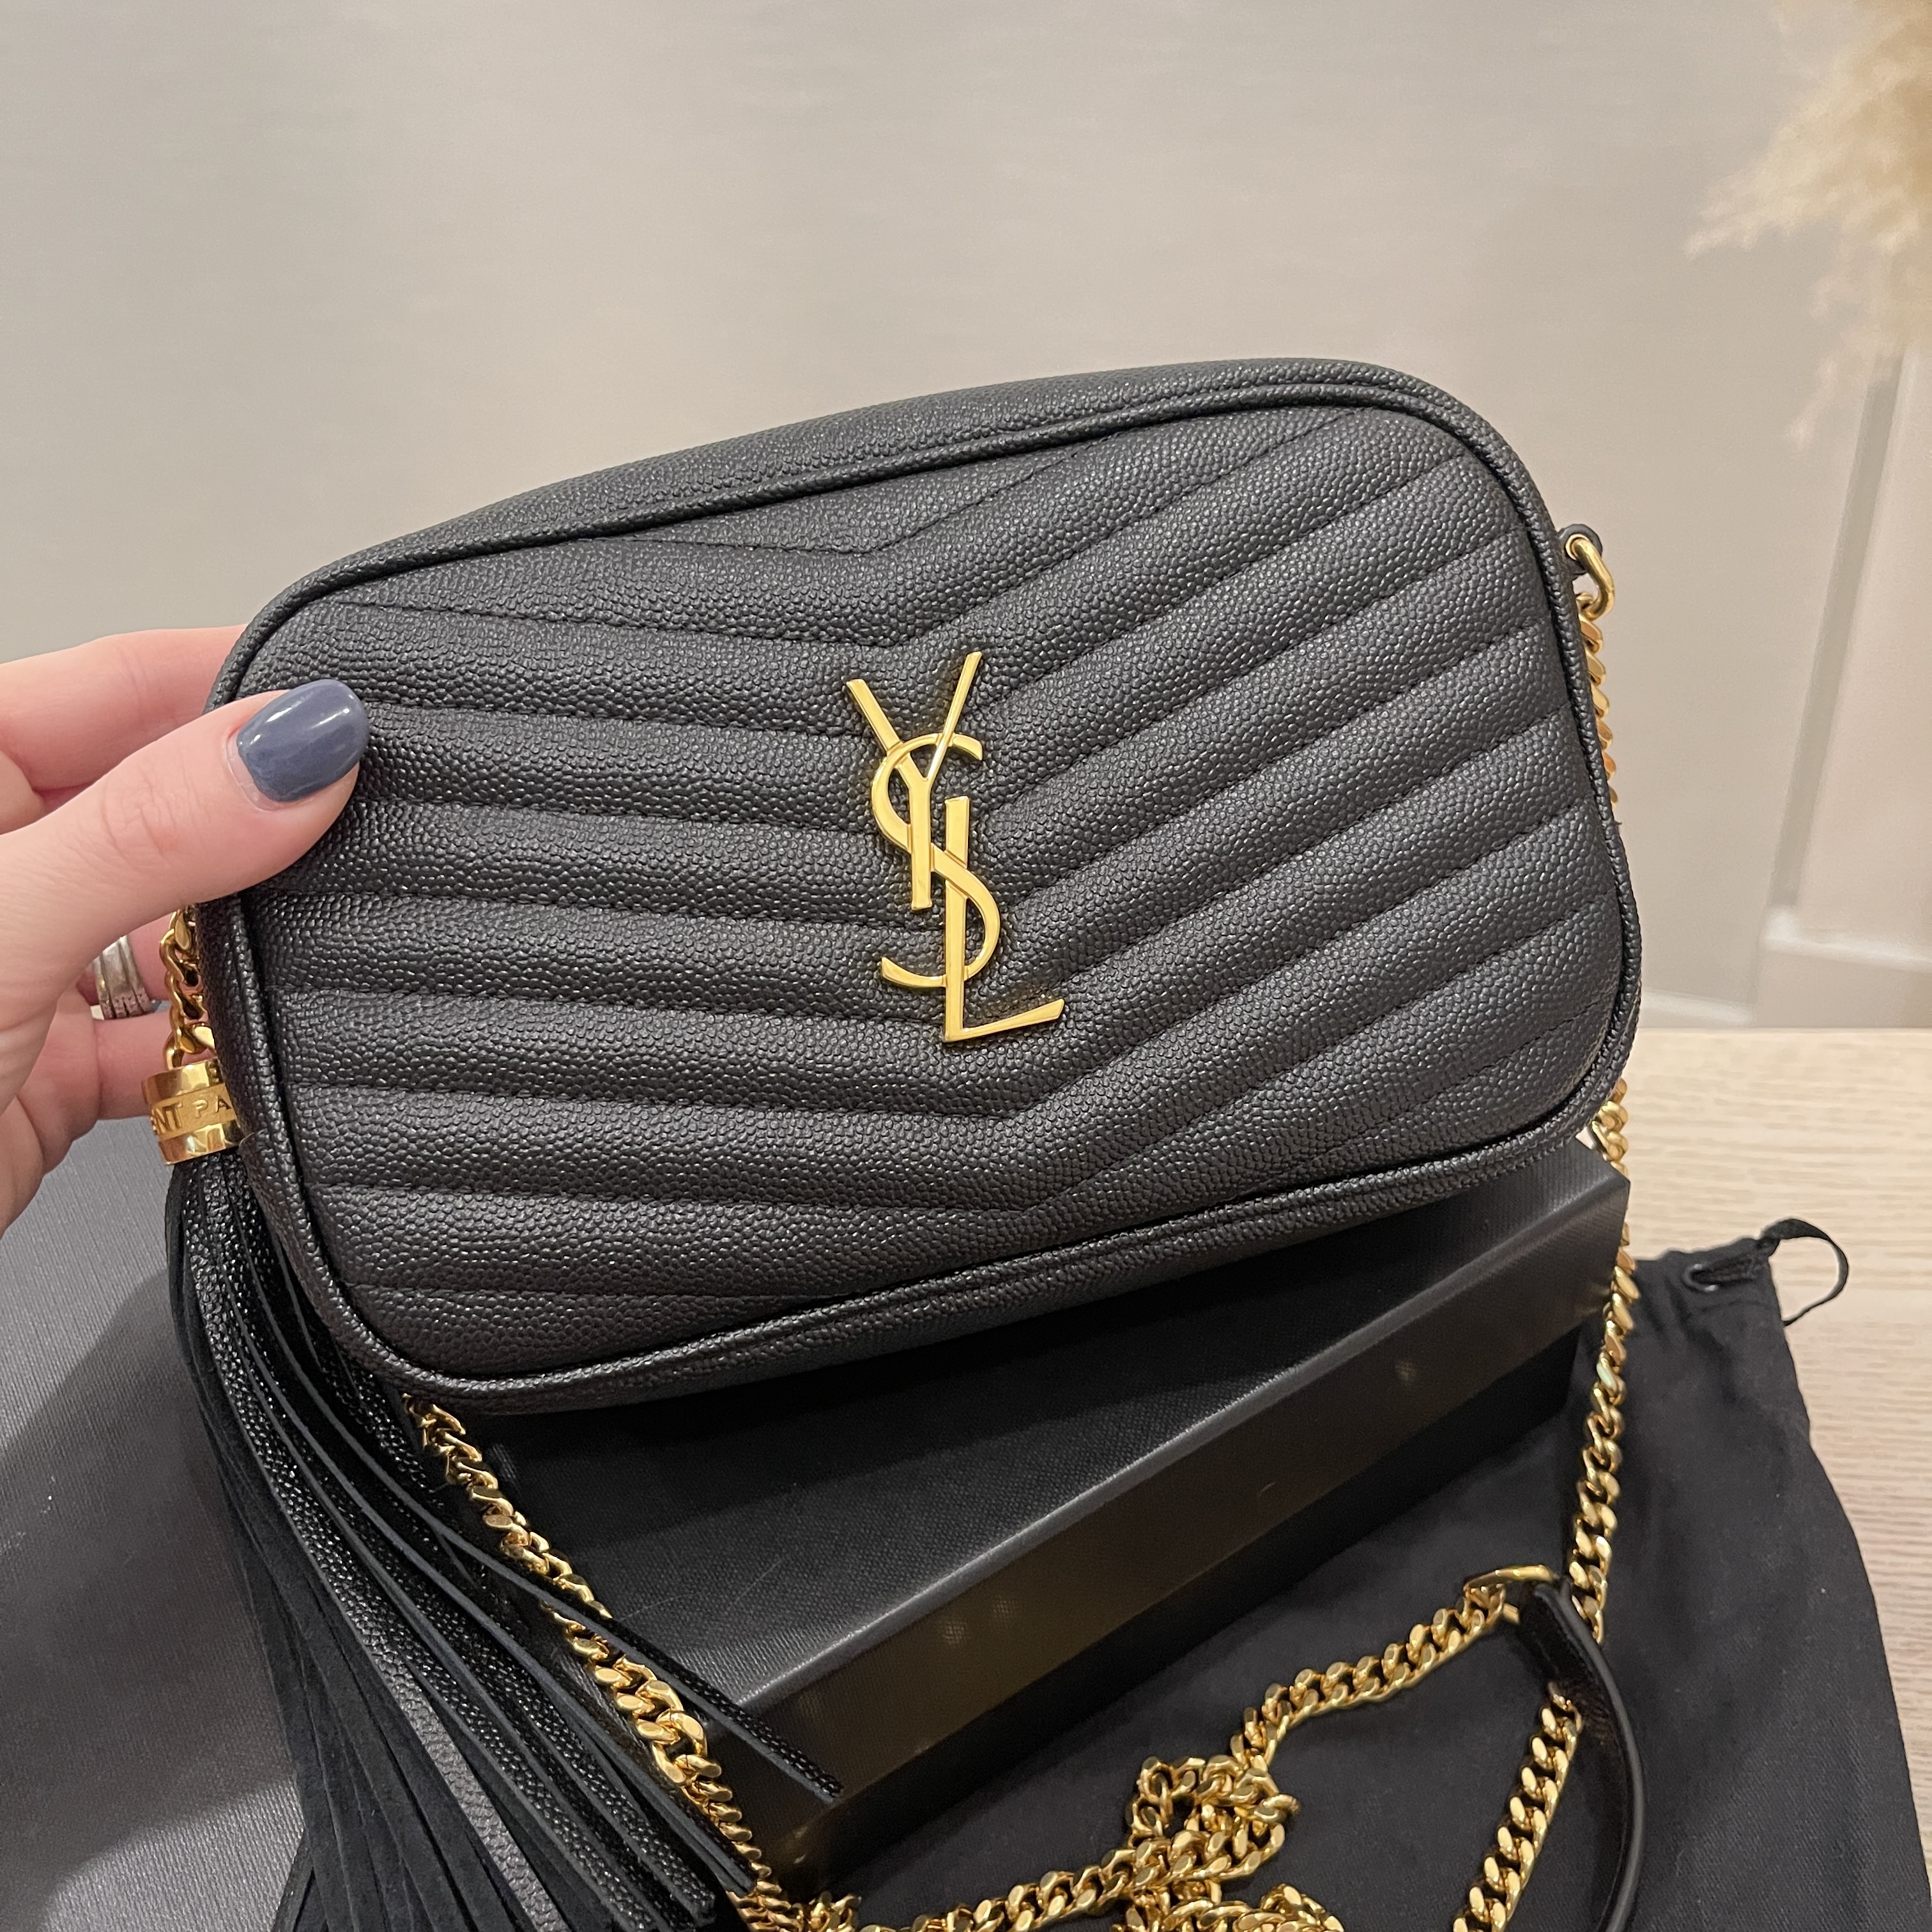 YSL Black Tri-Quilt Grained Leather Gold Hardware. Made in Italy. With authenticity  card, dustbag, box & certificate of authenticity from ENTRUPY ❤️ - Canon  E-Bags Prime